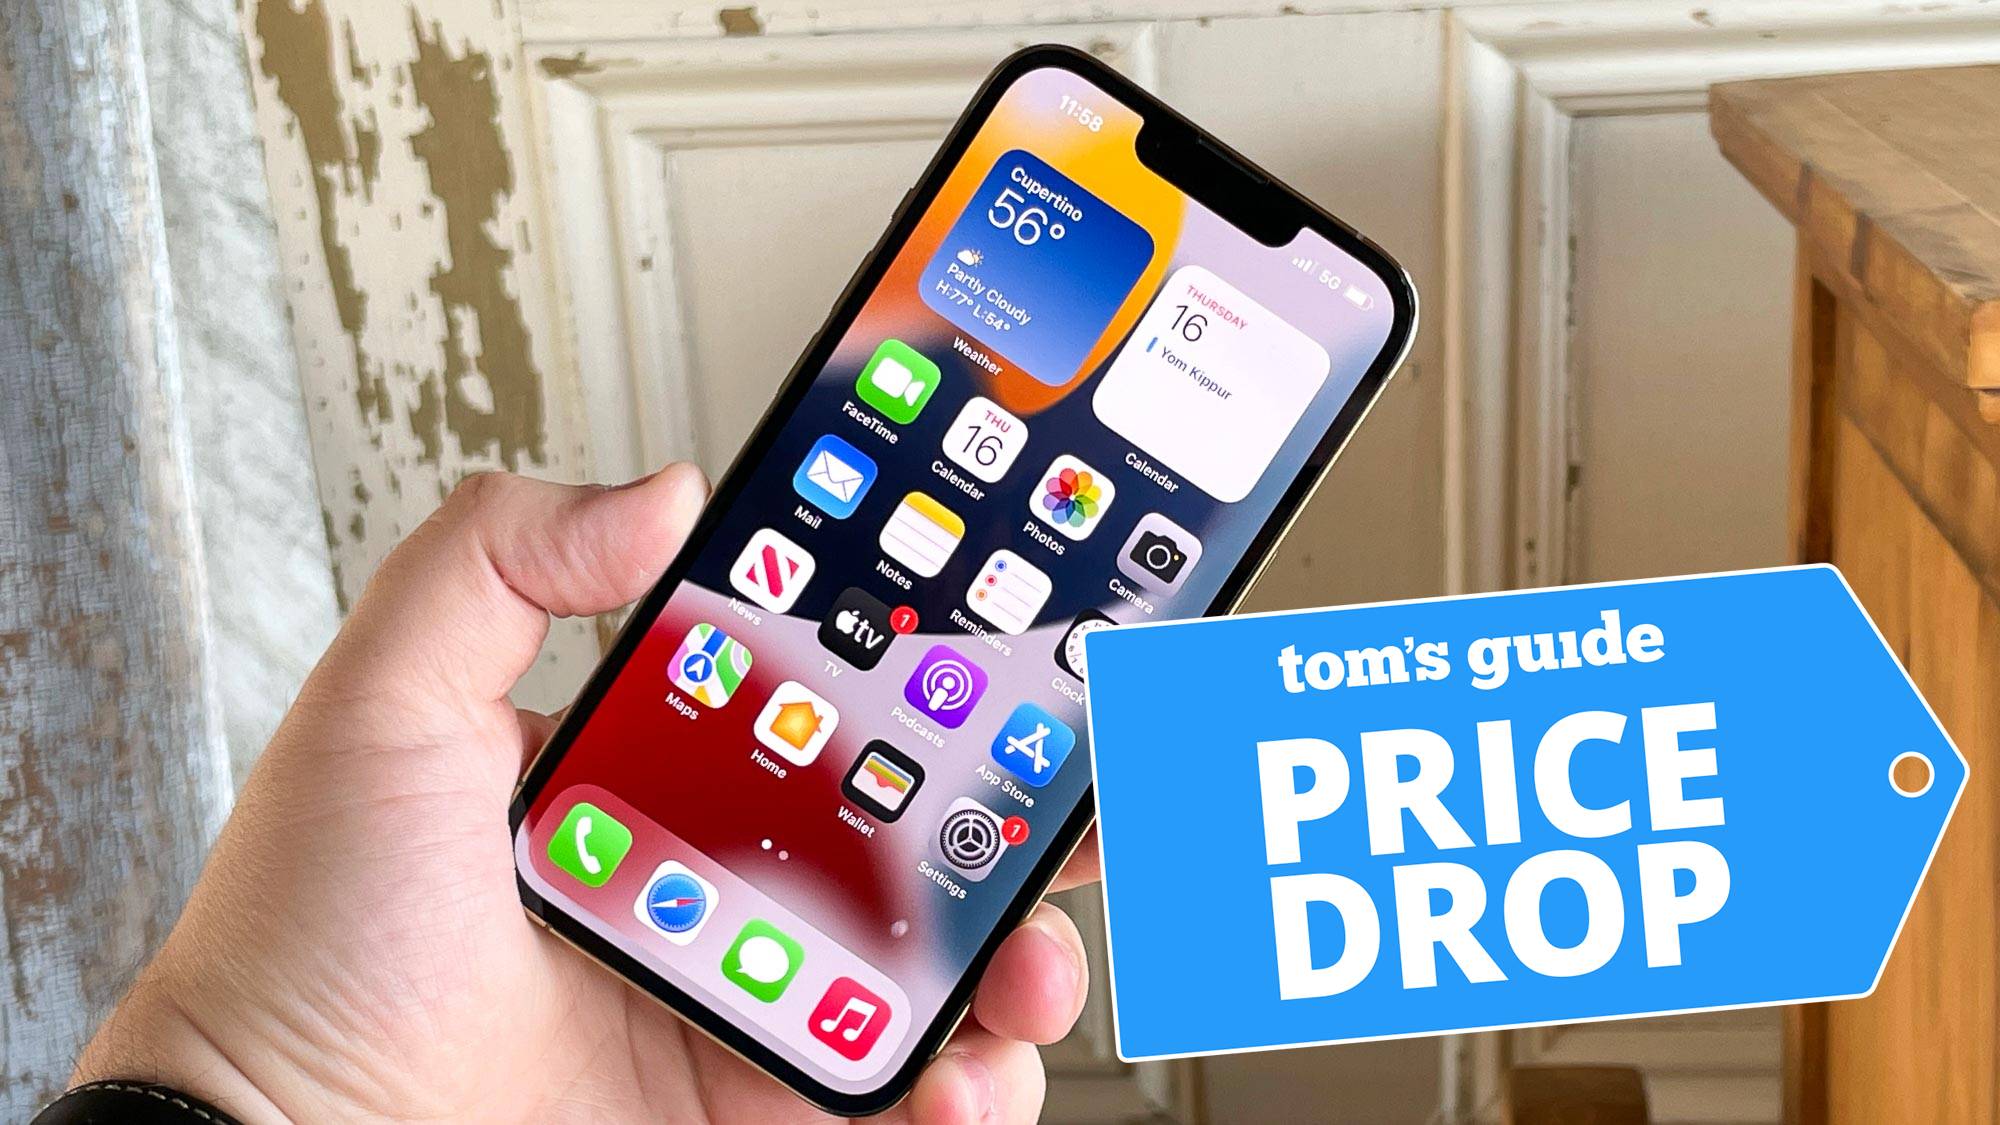 iPhone 13 Pro deal